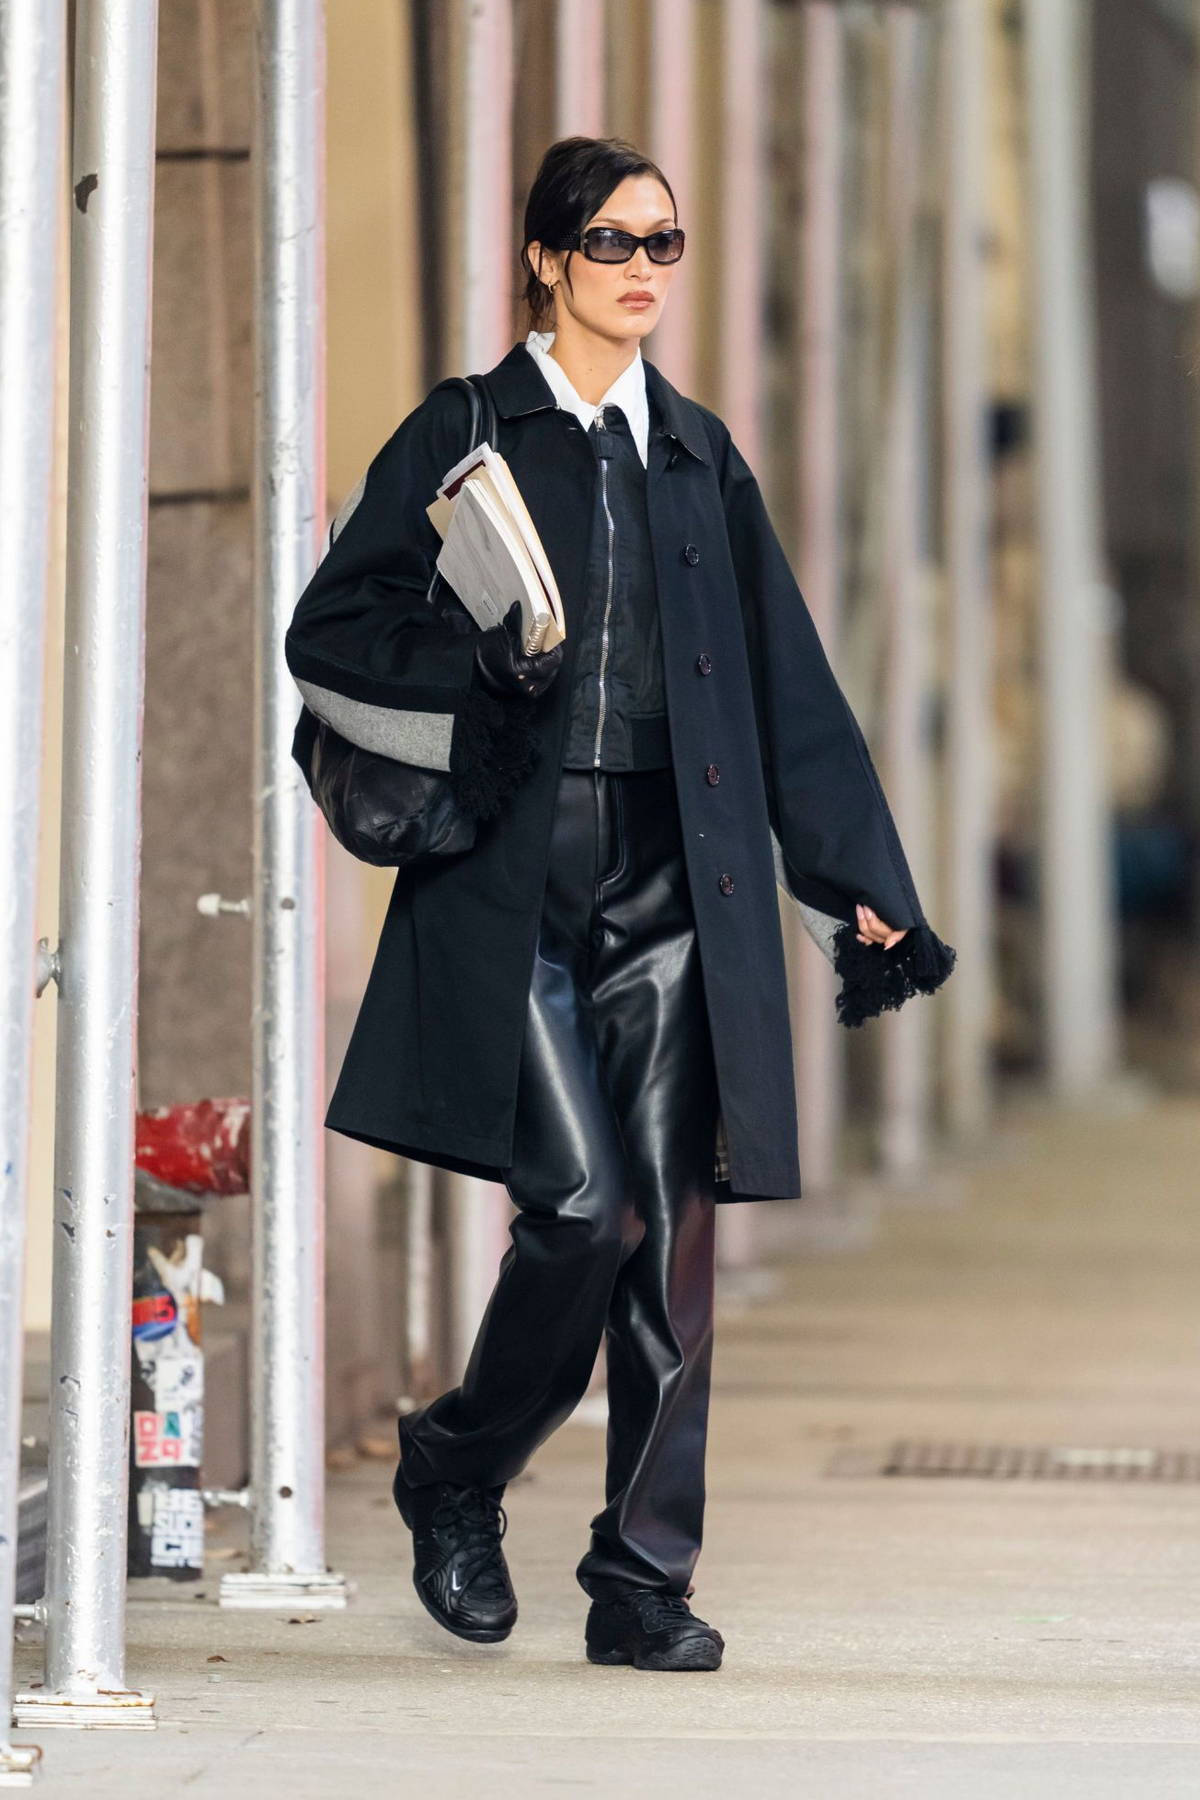 Bella Hadid looks chic in Burberry coat with pants while errands in SoHo, in